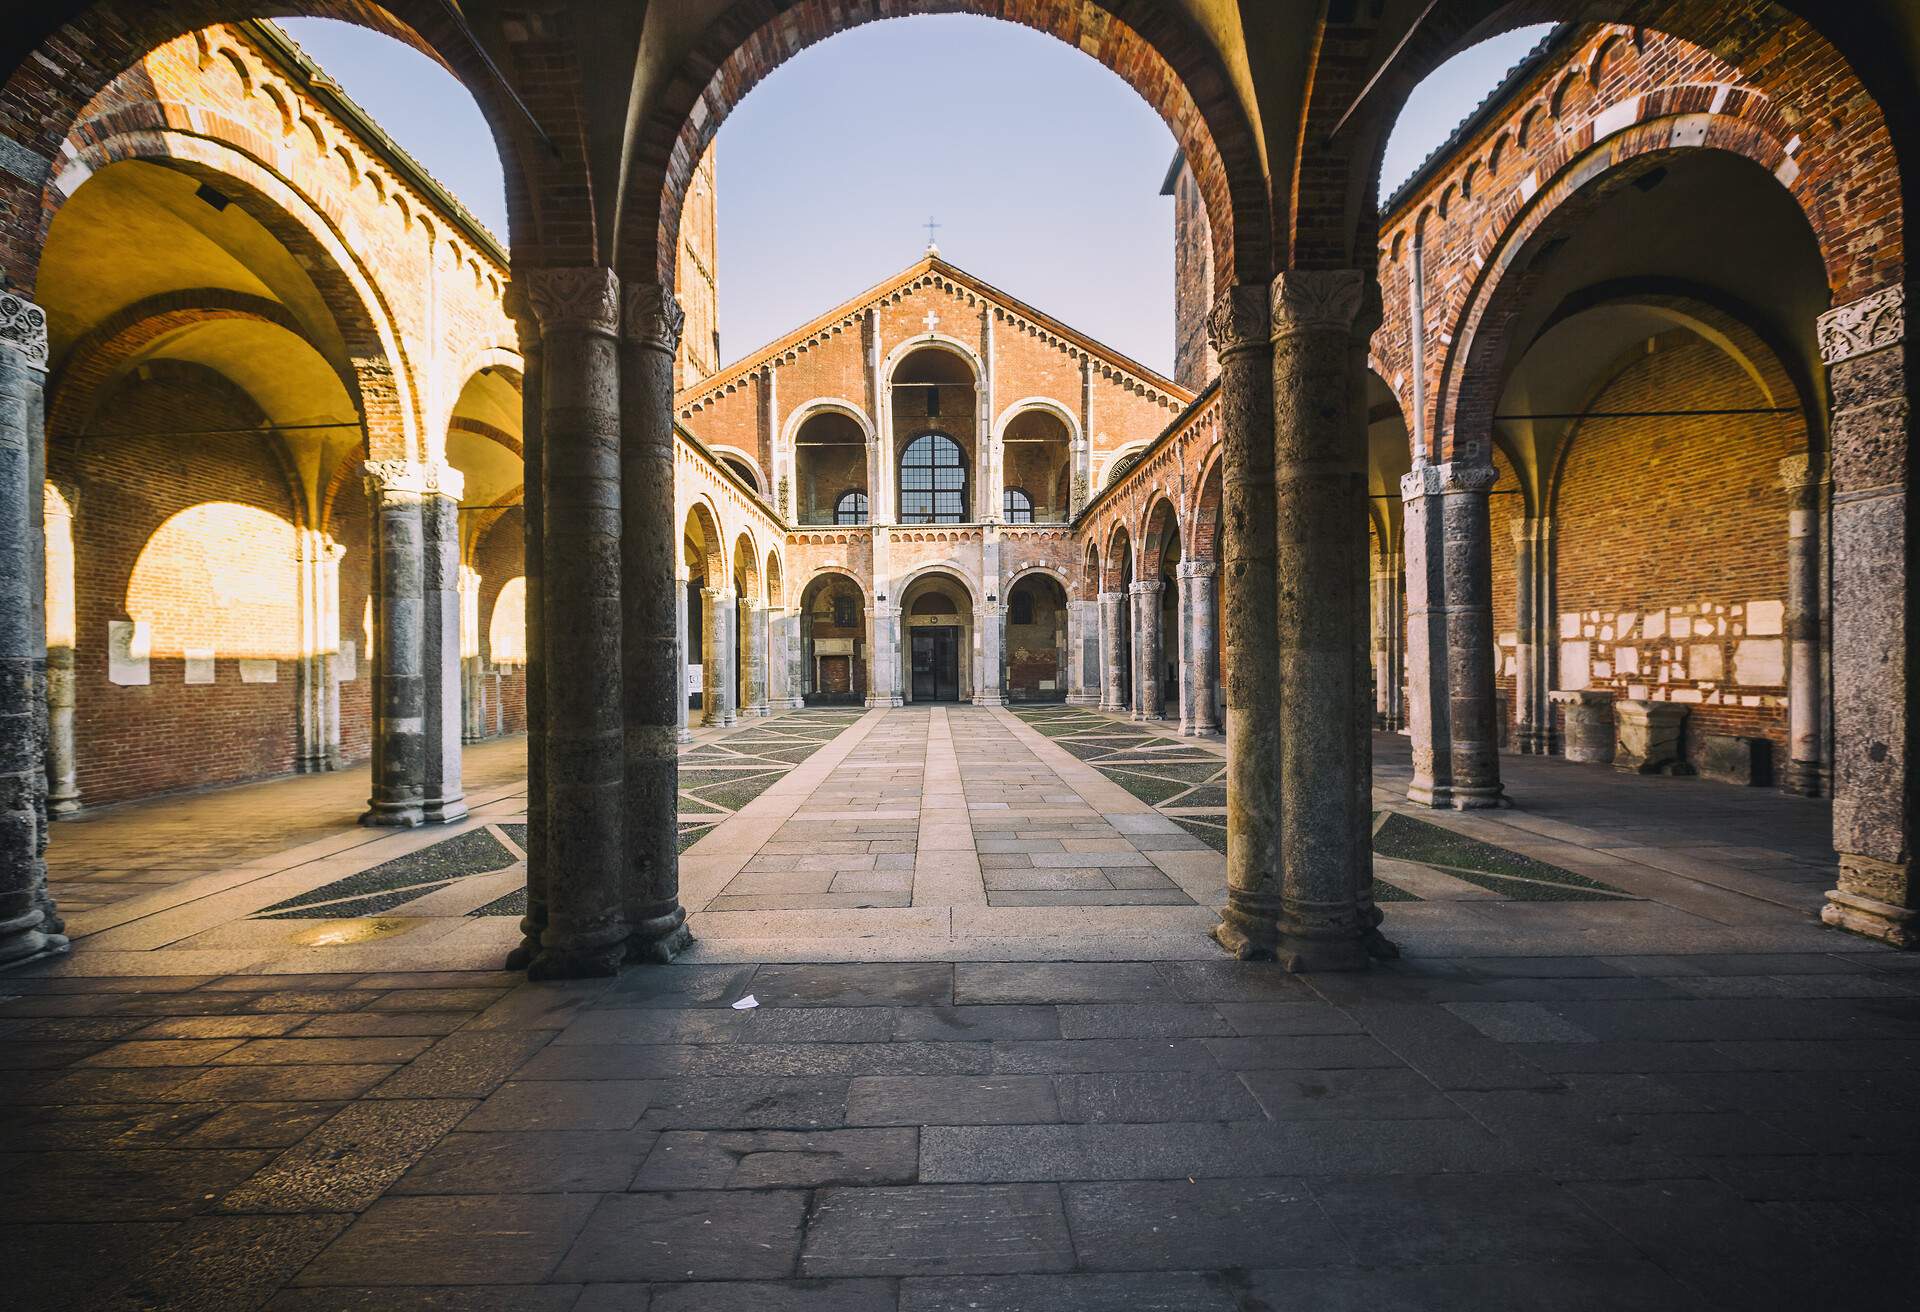 dest_italy_milan_basilica-di-sant_ambrogio_gettyimages-842772098_universal_within-usage-period_71211